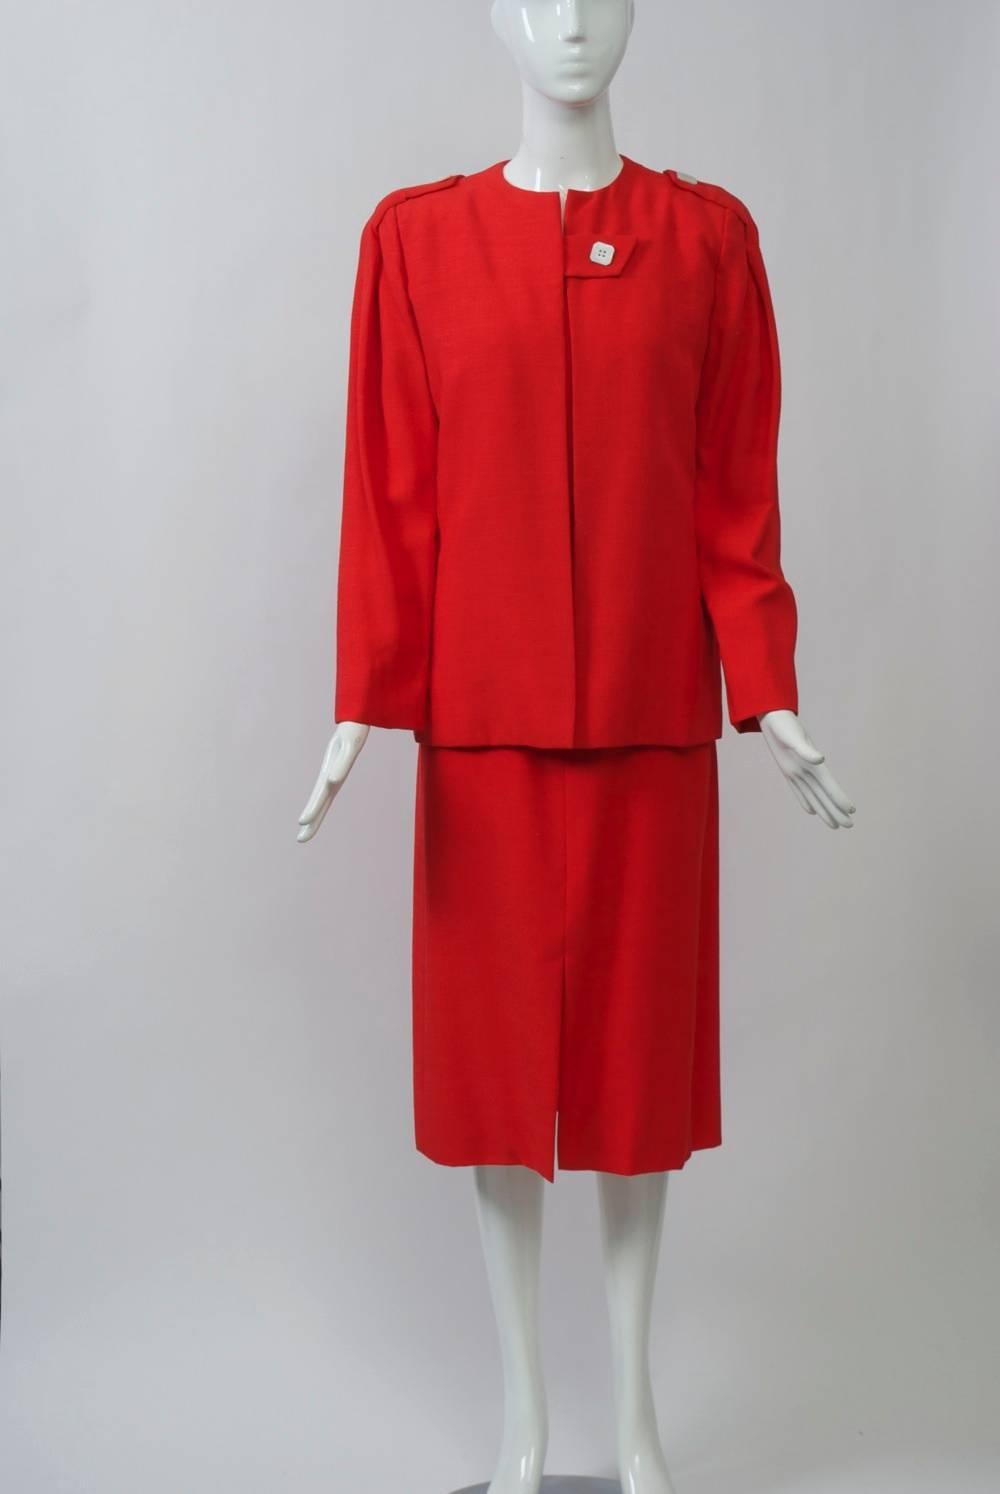 1980s Pauline Trigére dress and jacket in a red linen-blend fabric, the sleeveless sheath dress with square neckline, shoulder tab detail with pearl button closure, and side back zipper. A matching hip-length jacket features a similar tab closure